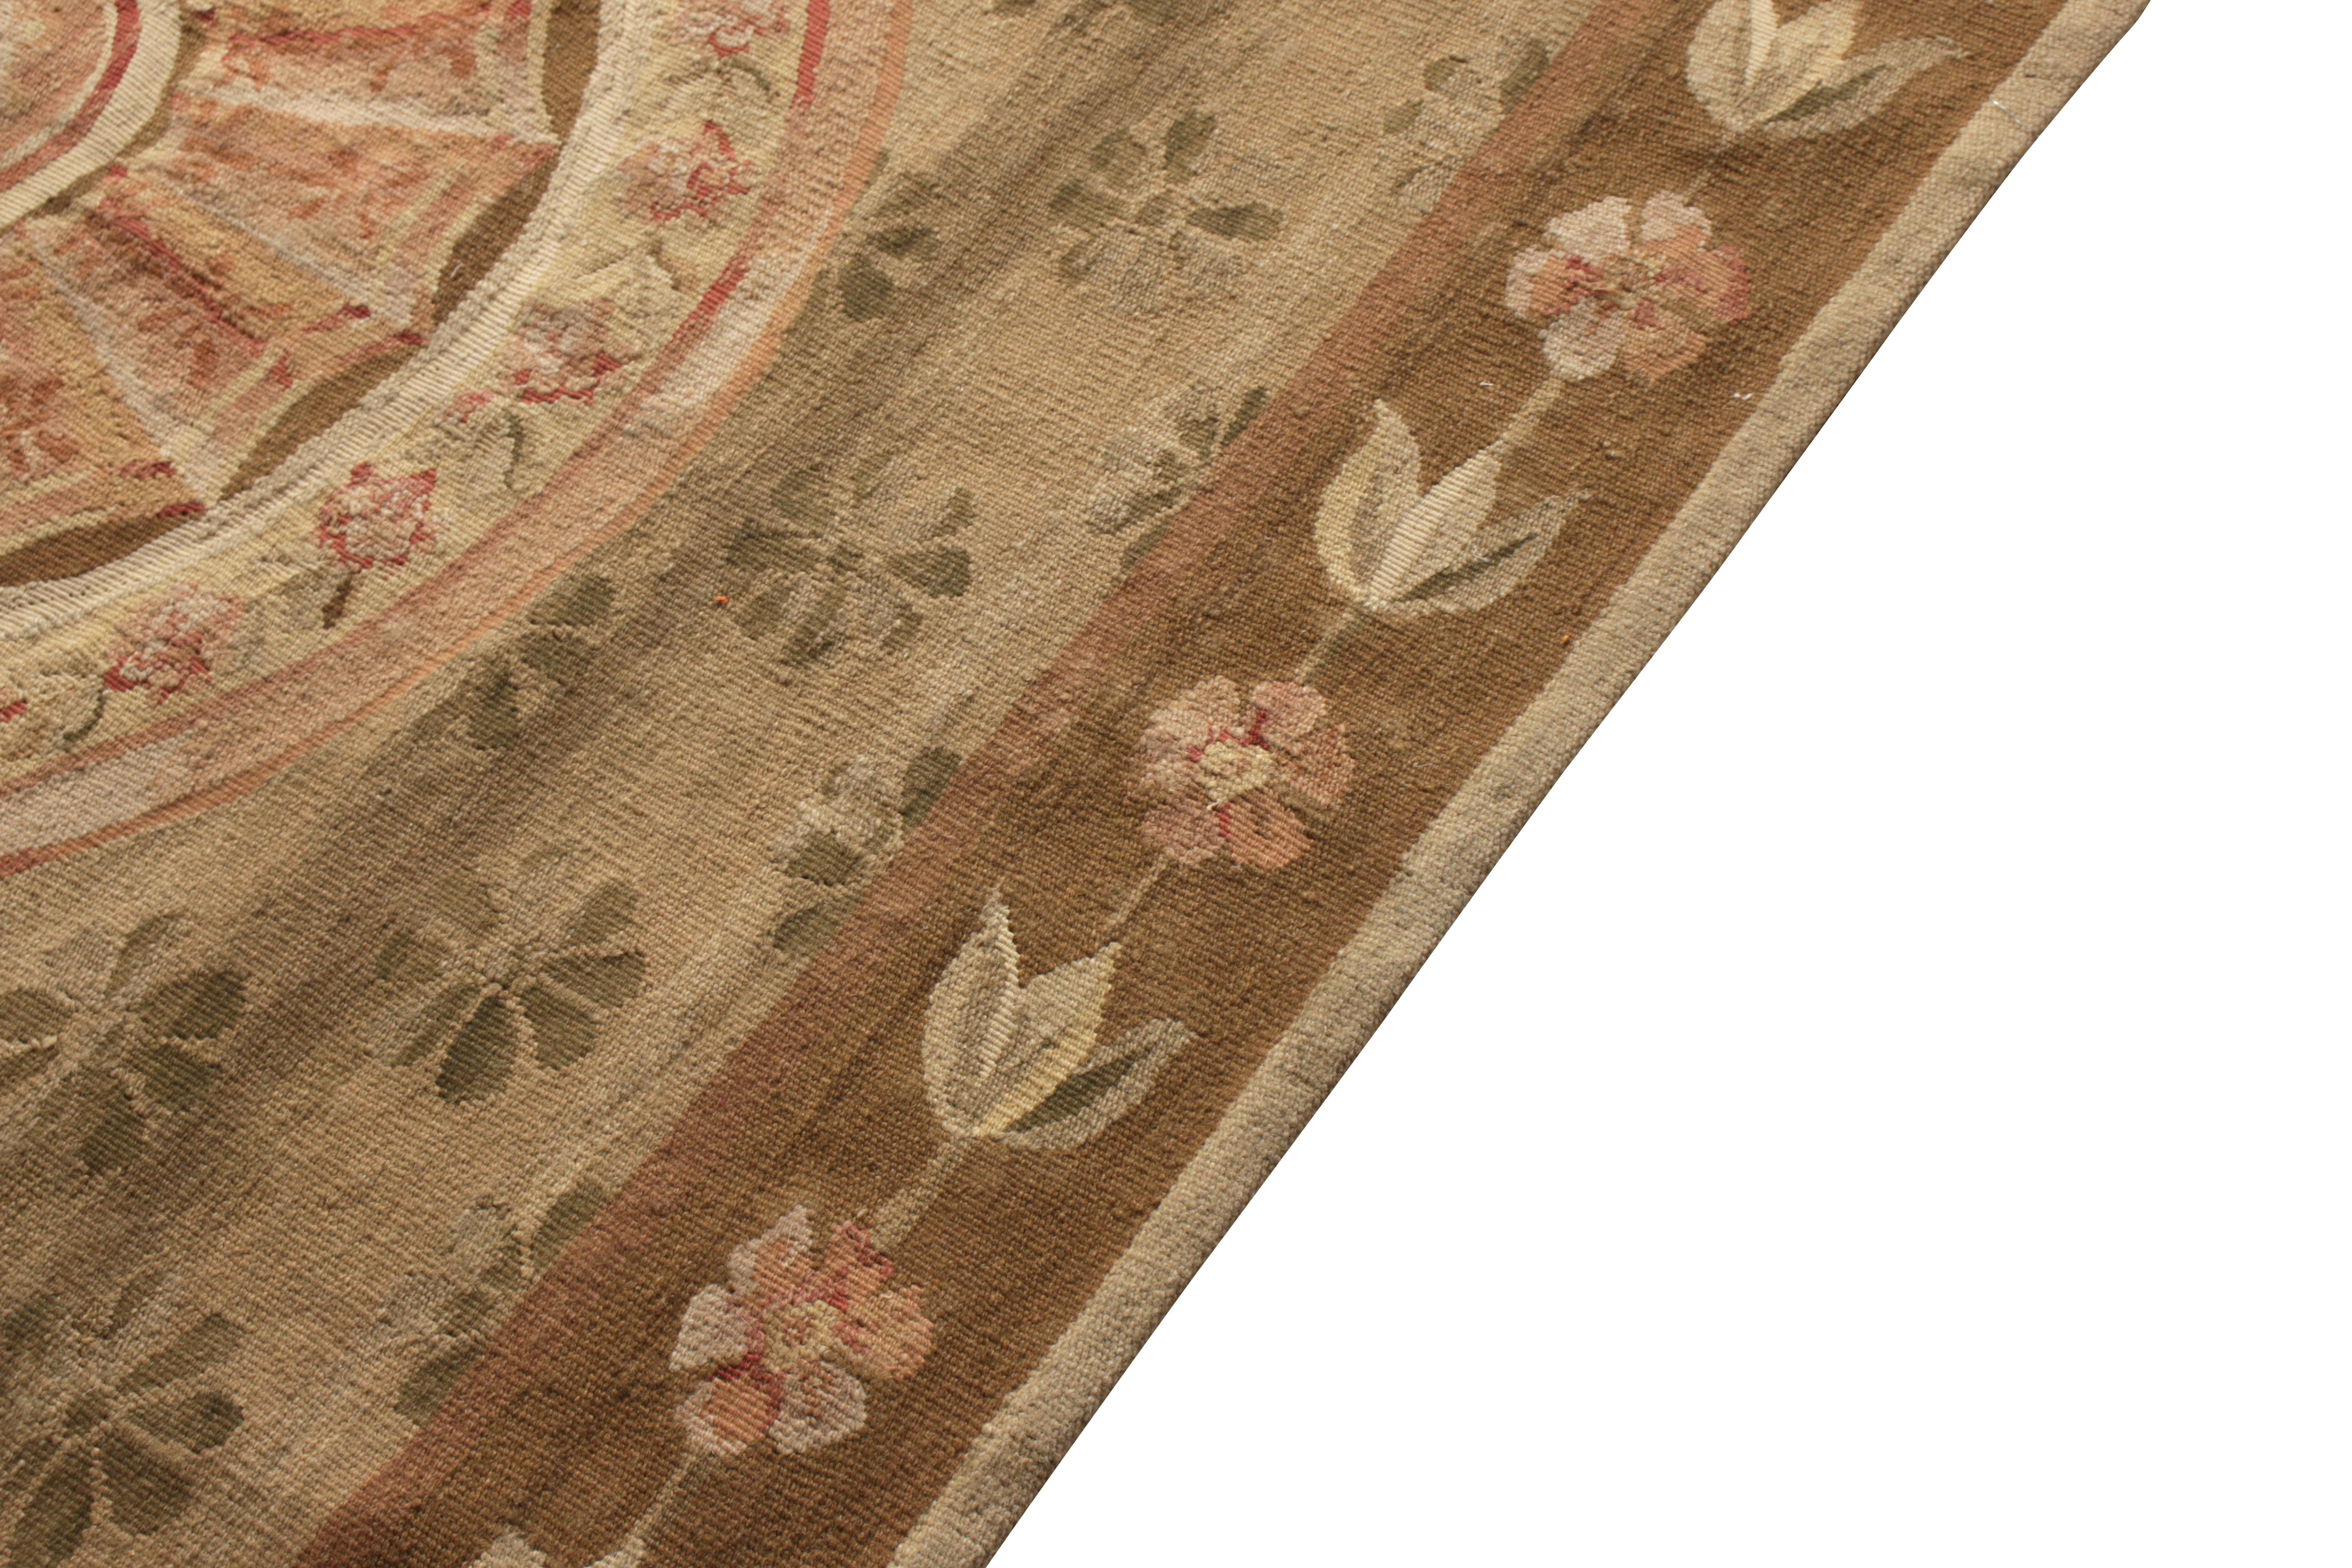 Chinese Rug & Kilim's Aubusson Style Kilim Beige Brown and Pink Floral Rug